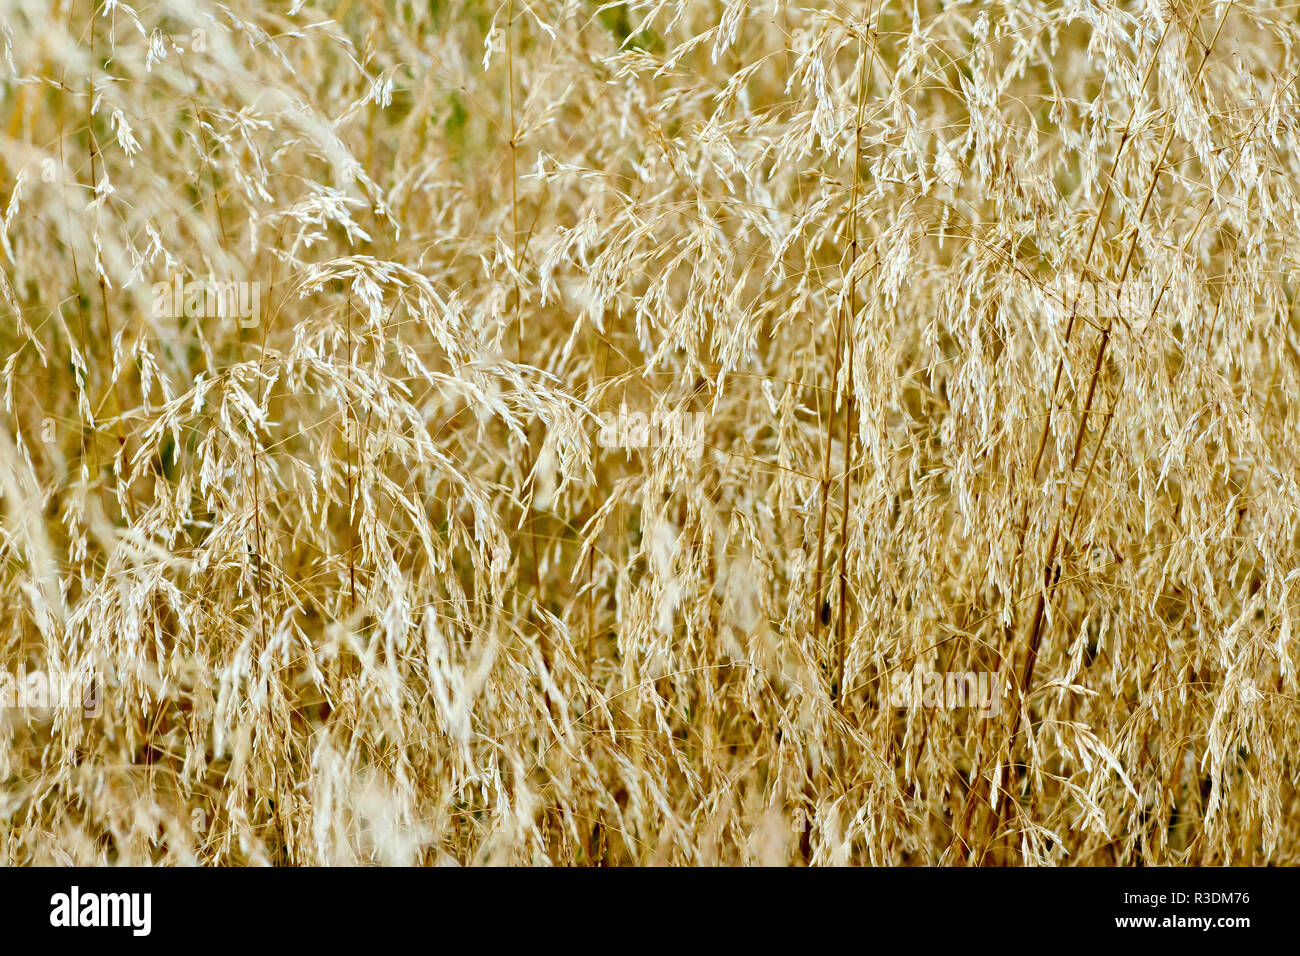 An abstract image of a wall of tall grass gone to seed on the dunes. Stock Photo